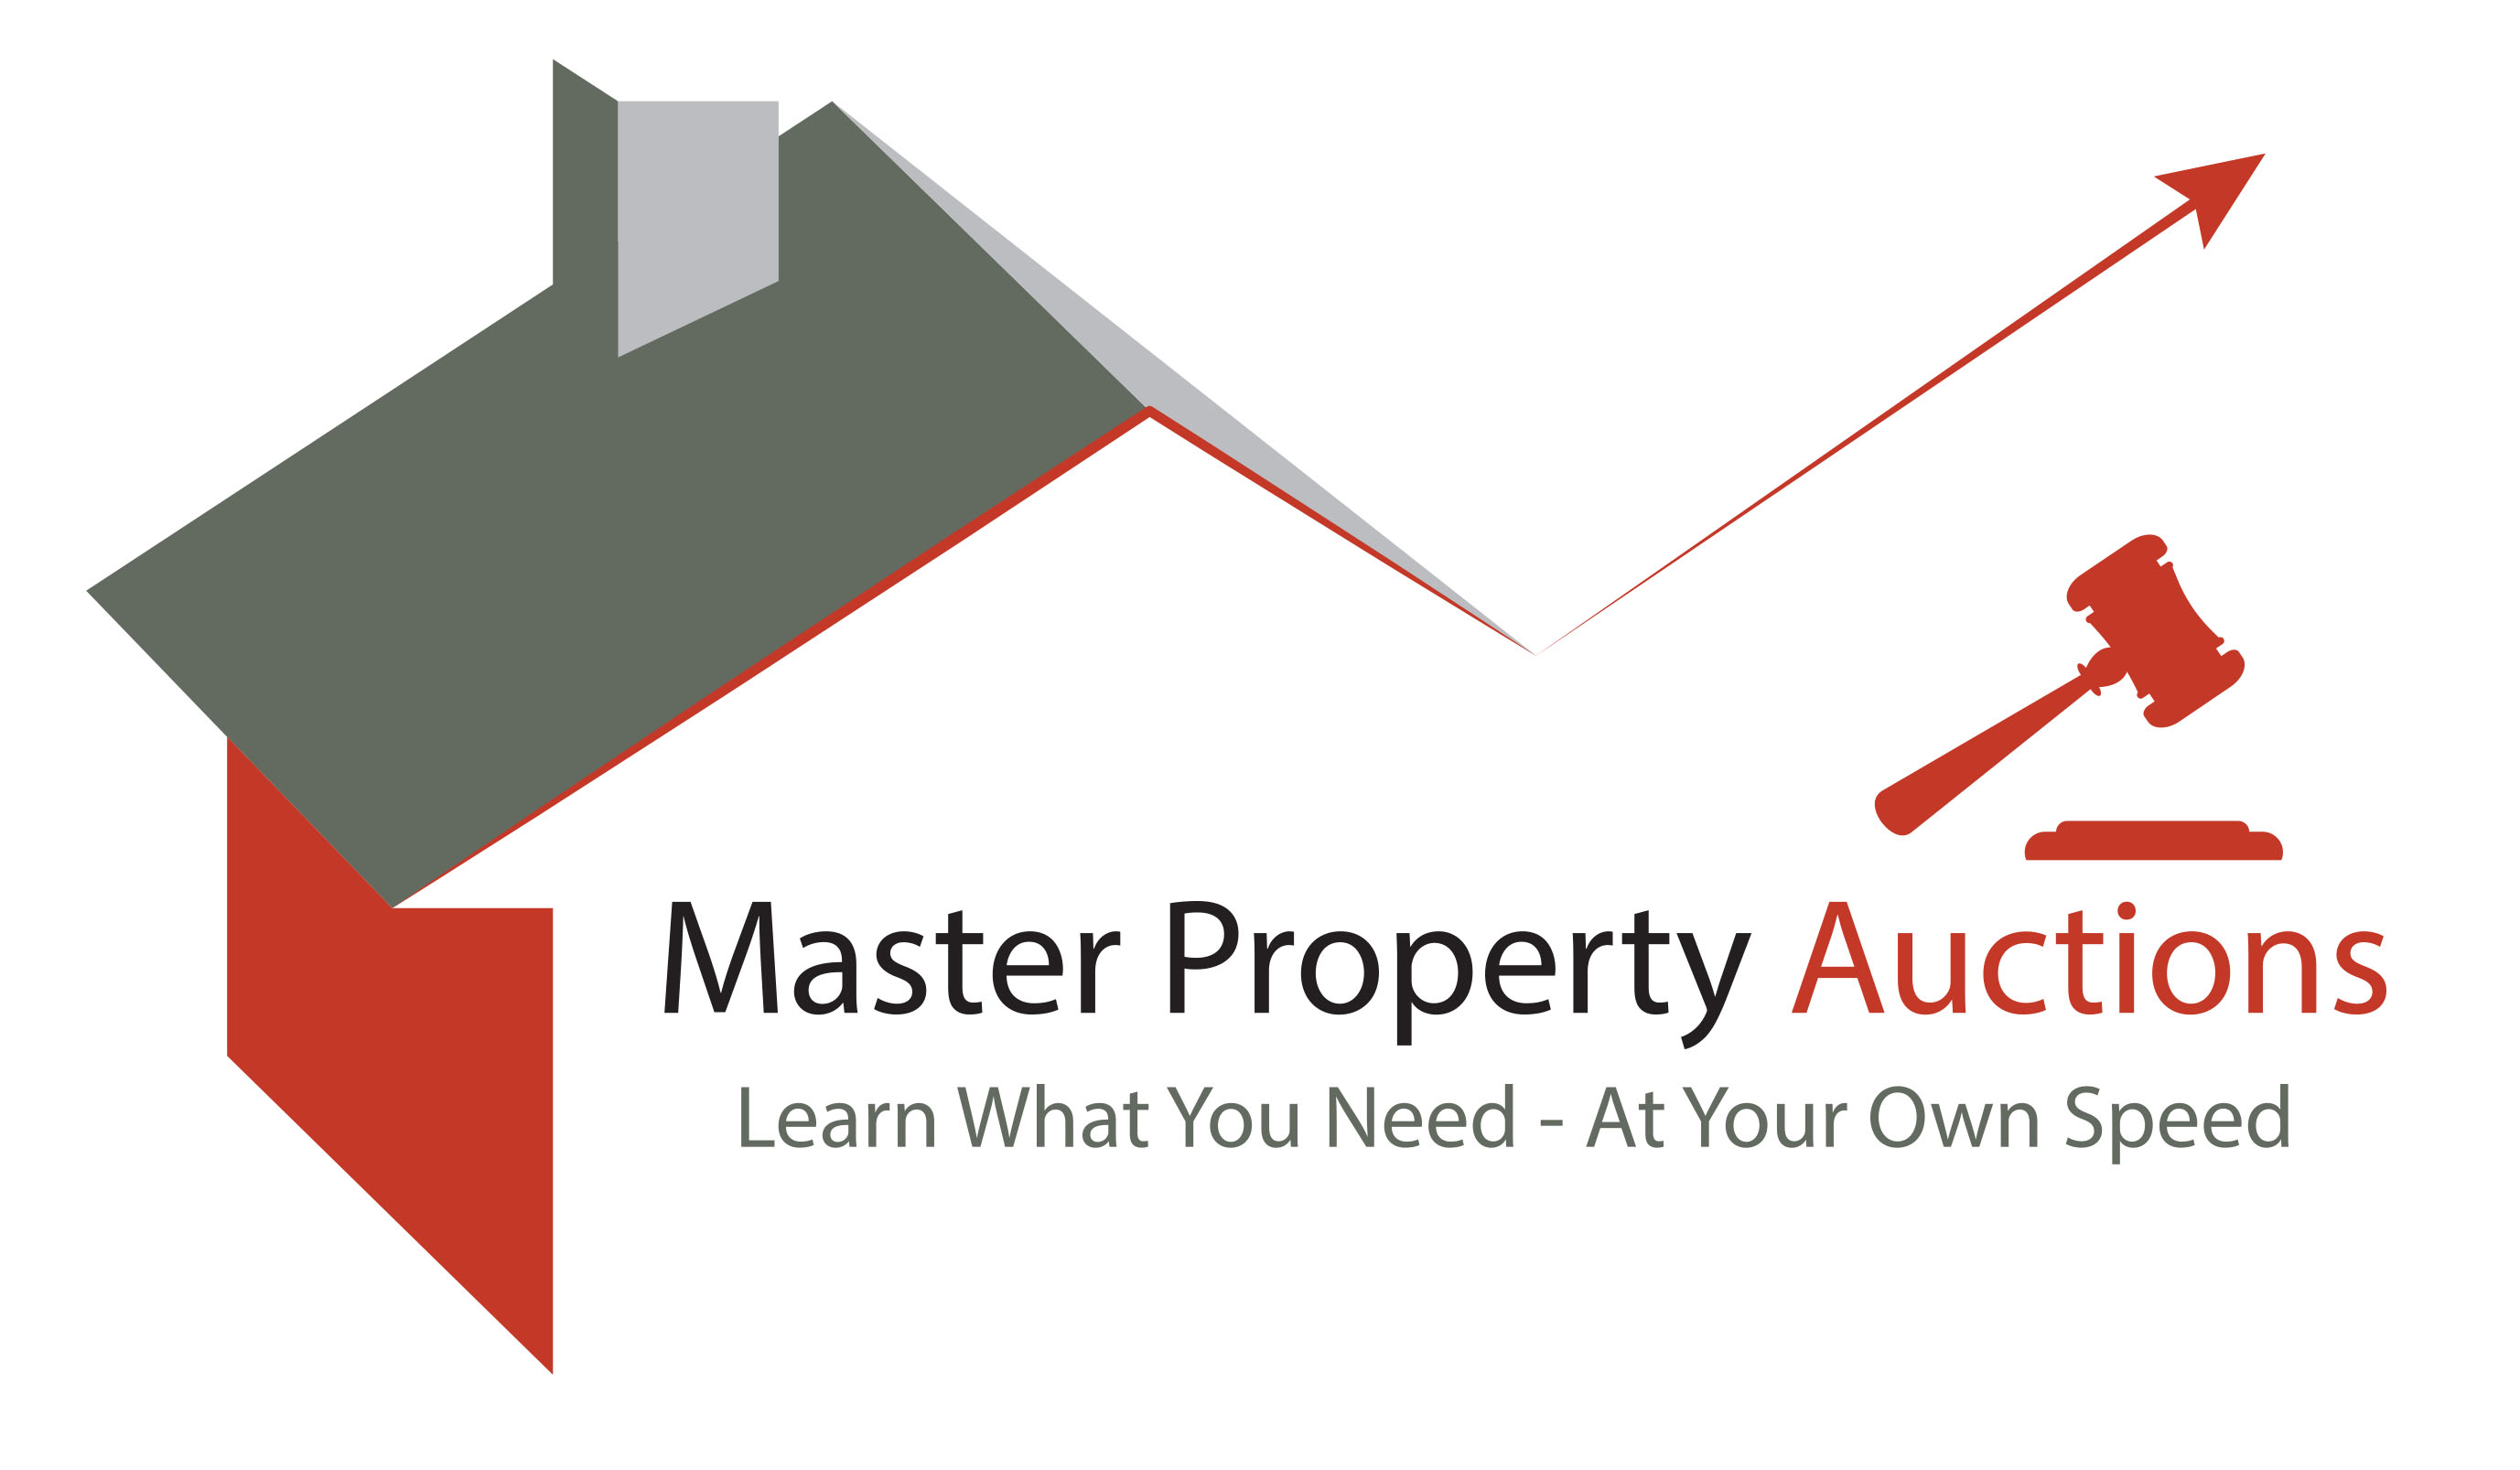 Master Property Auctions